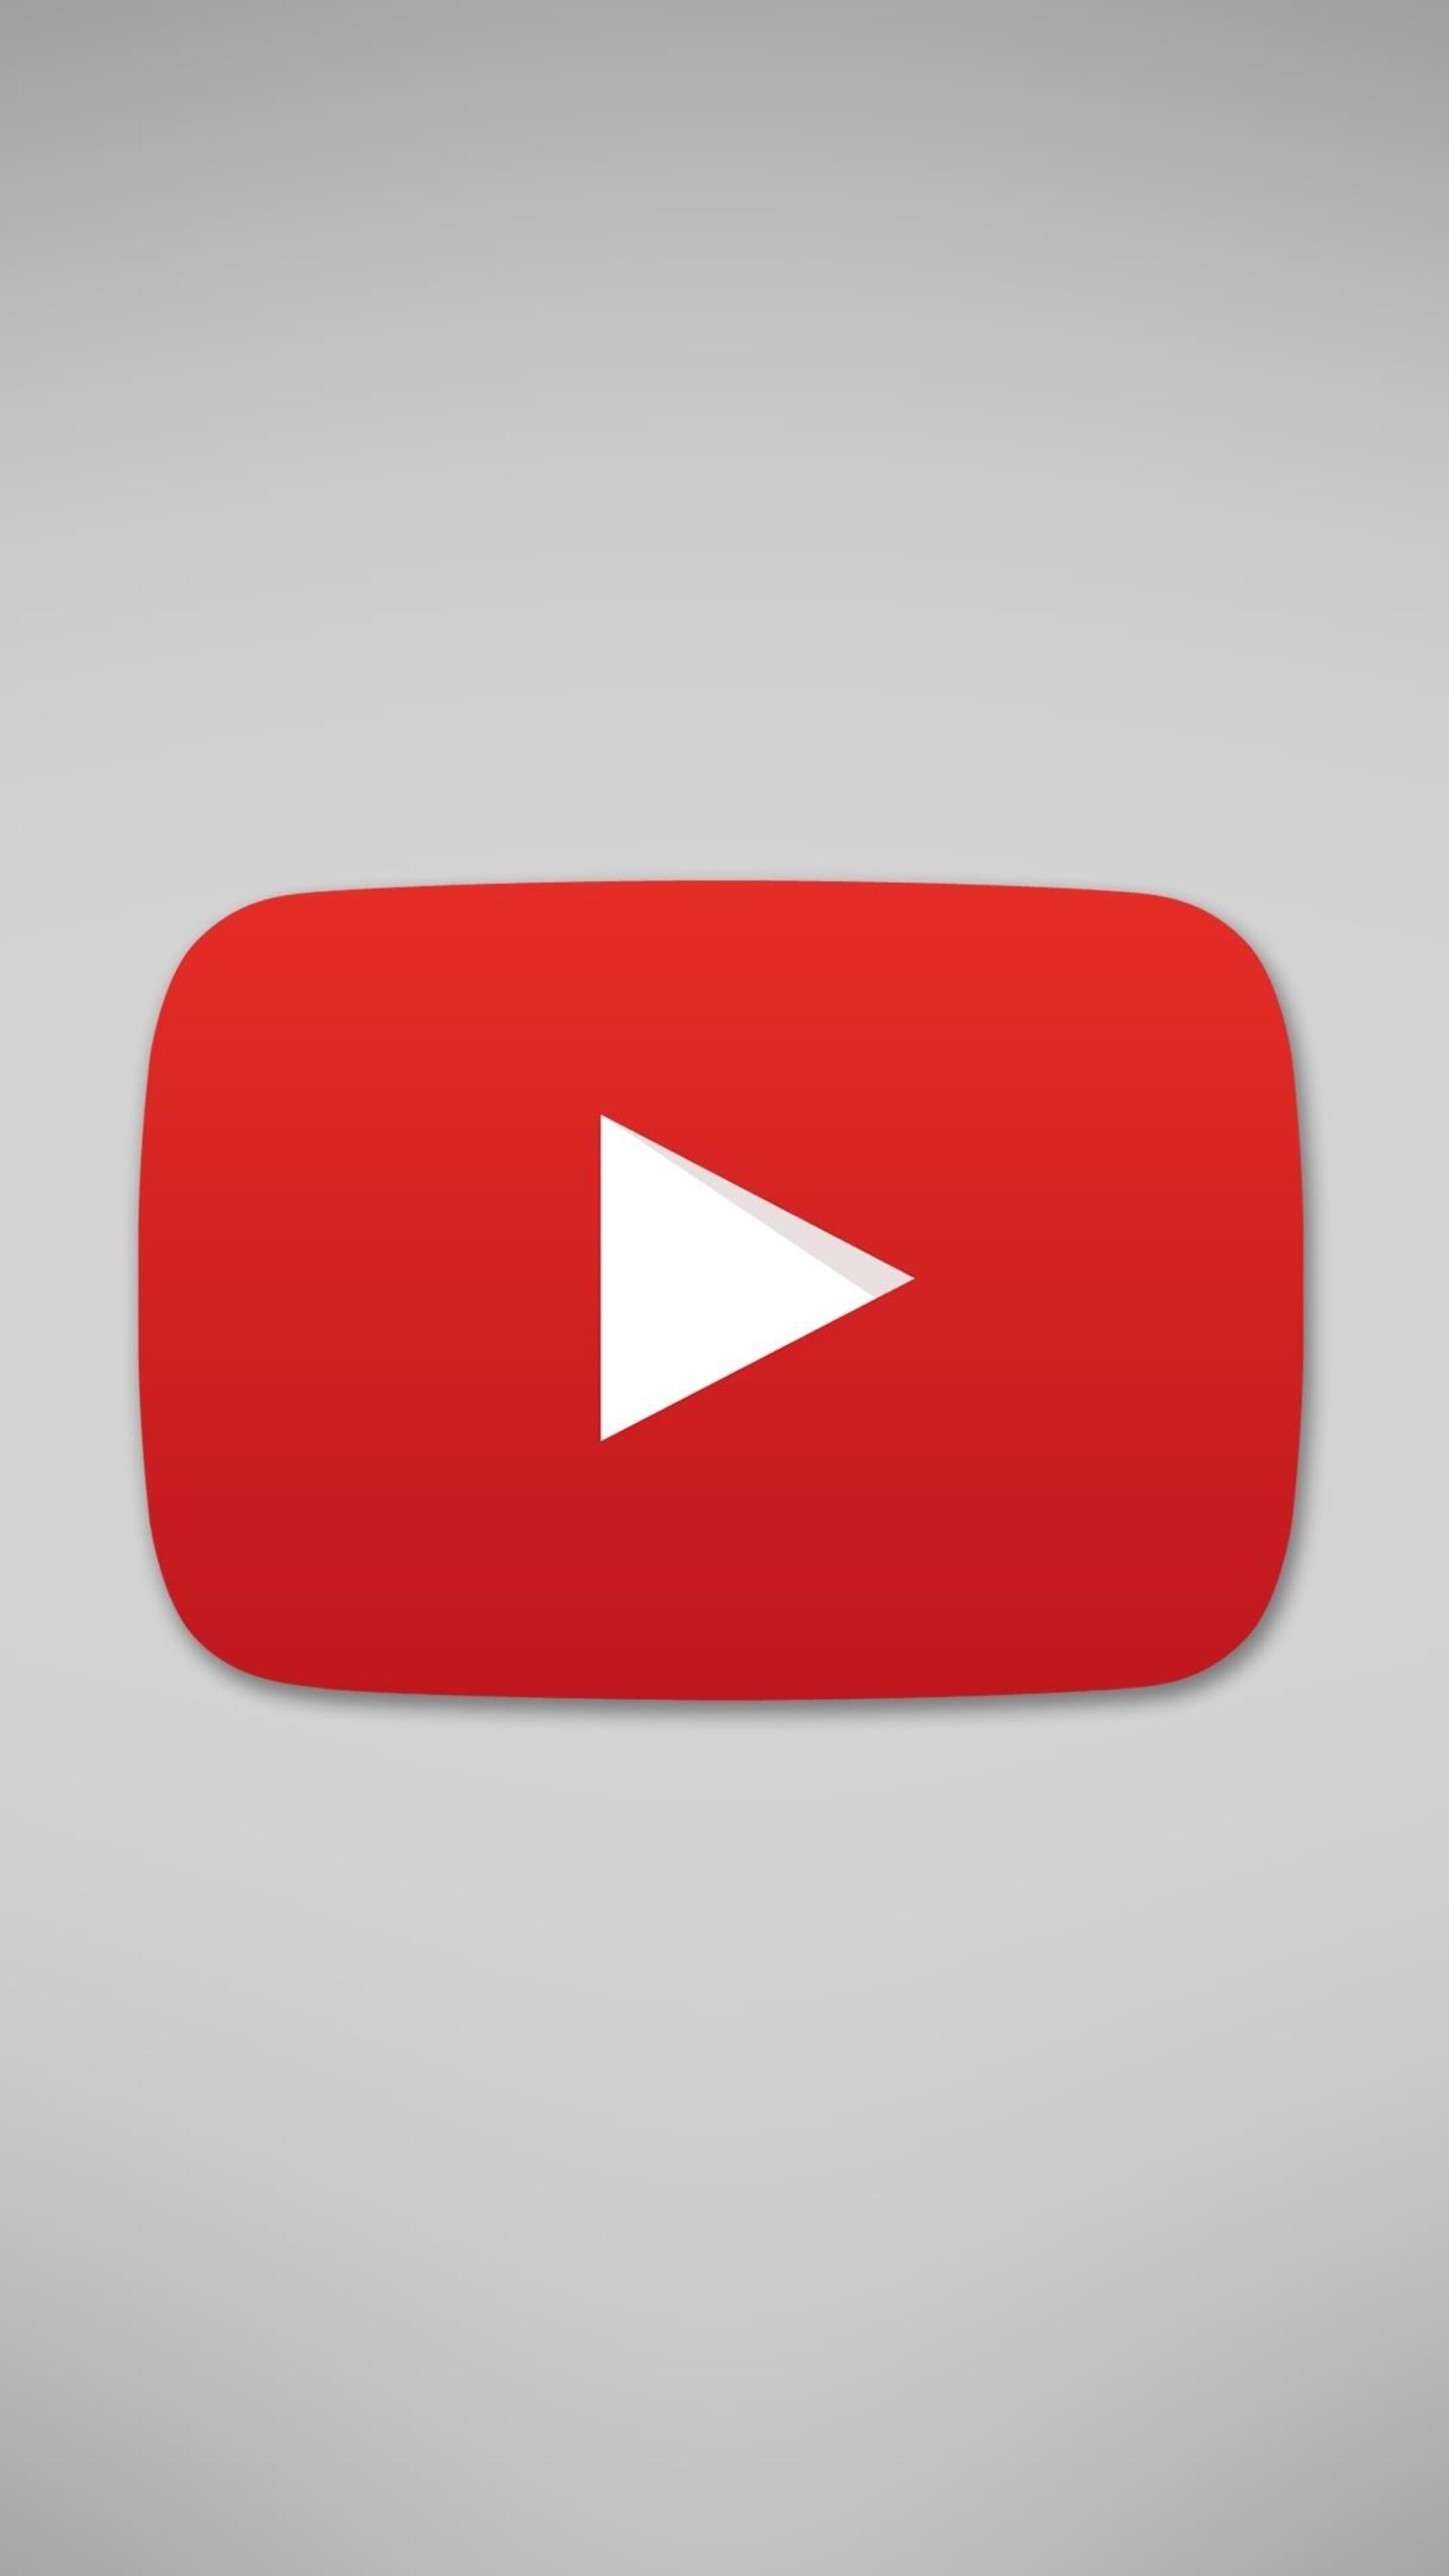 YouTube: More than 2.5 billion monthly users, Google's ownership. 2160x3840 4K Wallpaper.